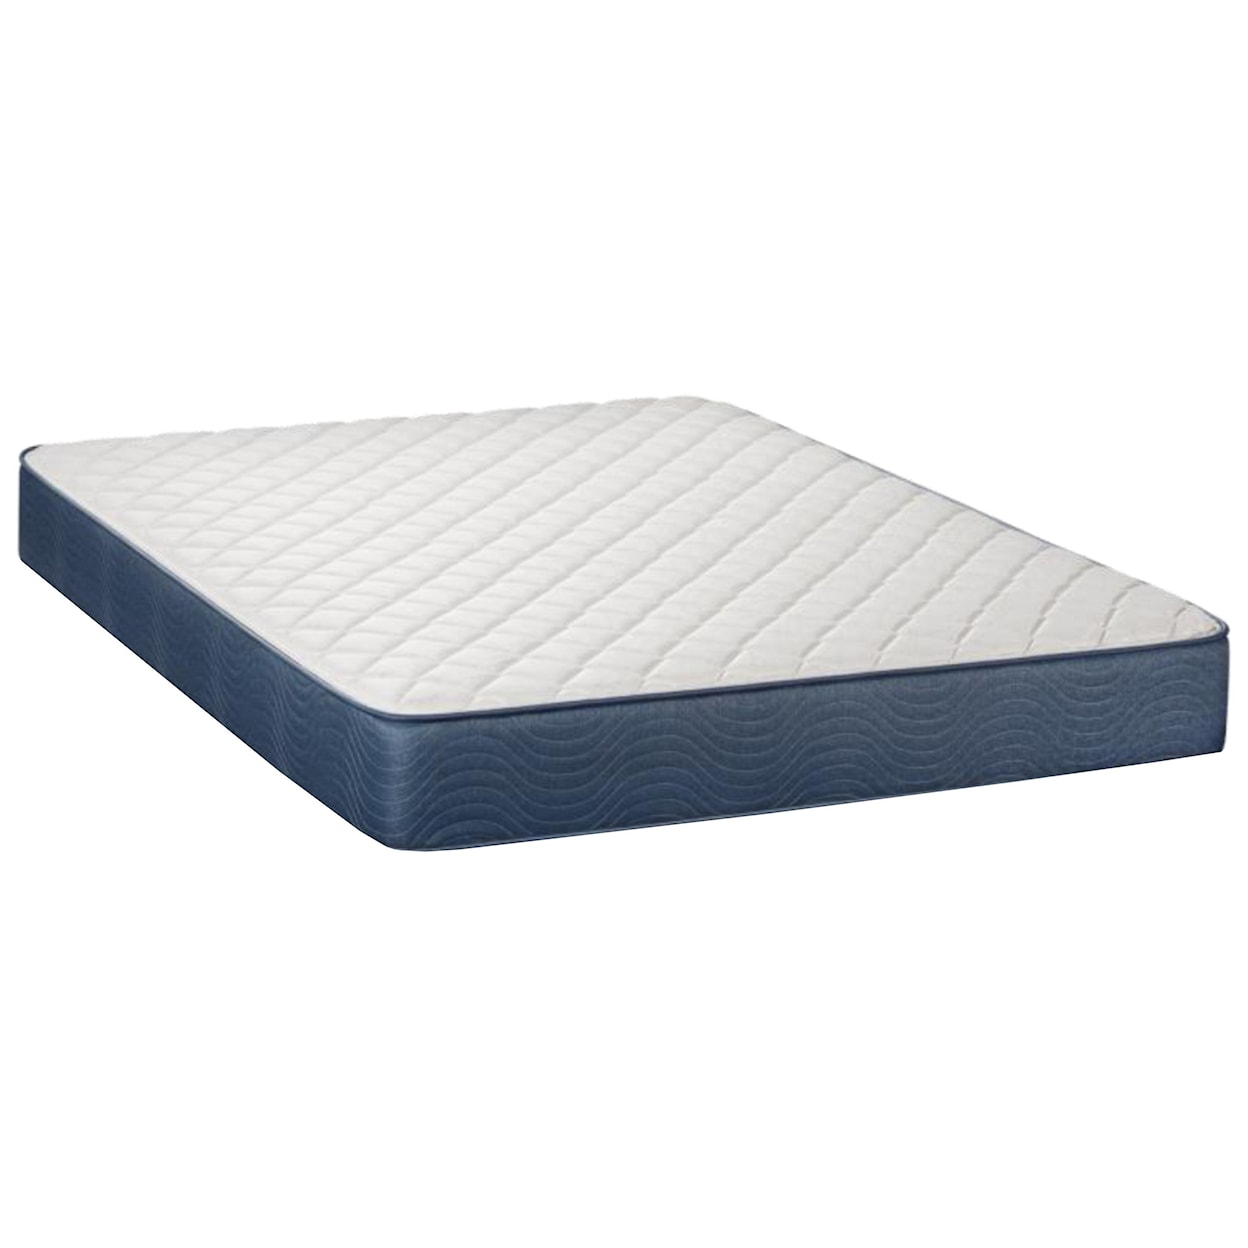 Restonic Sumner Firm King 9" Firm Two Sided Mattress